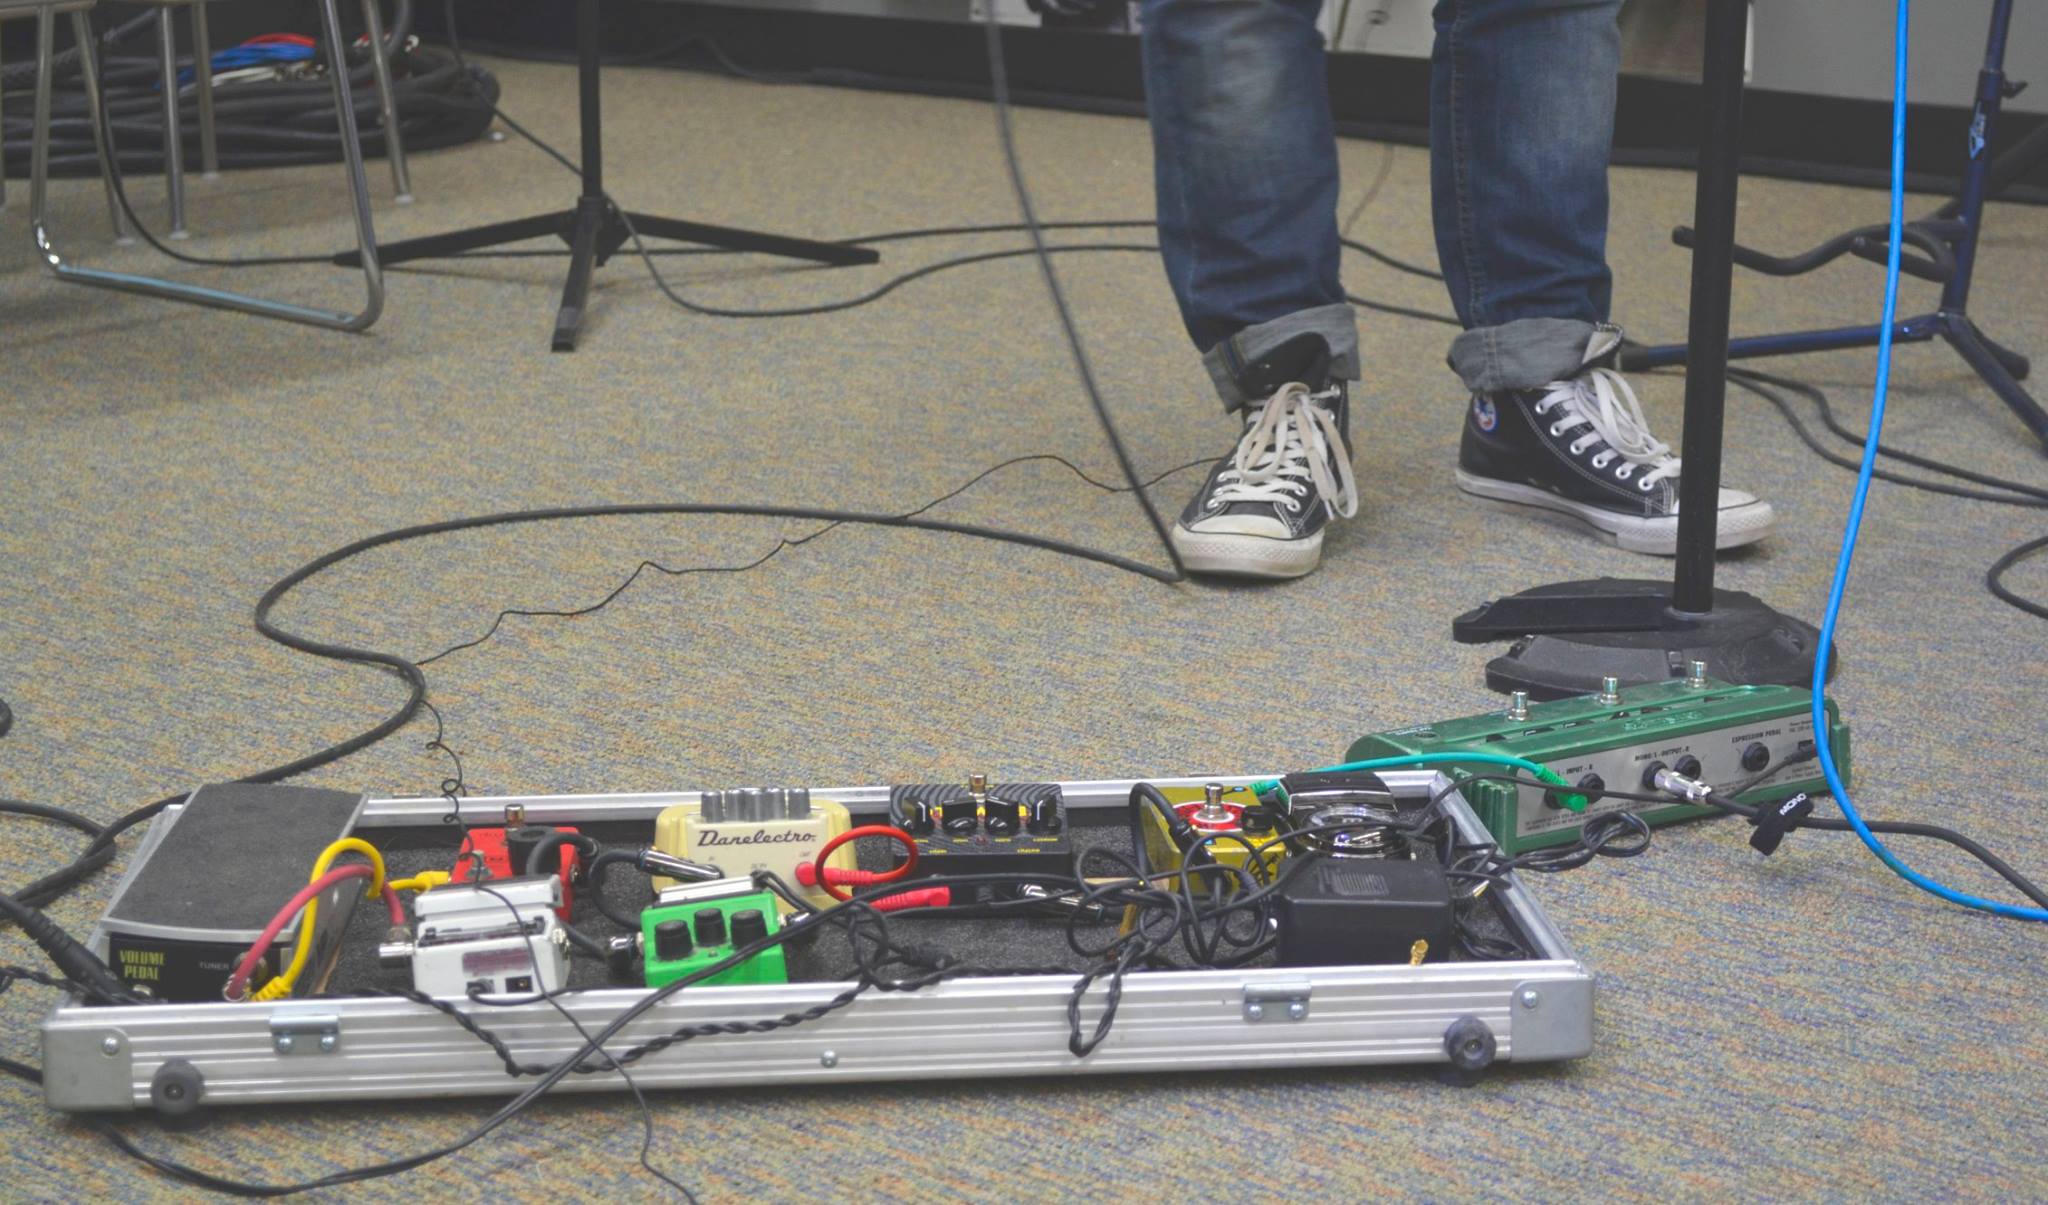 A bundle of distortion pedals used during a jam session